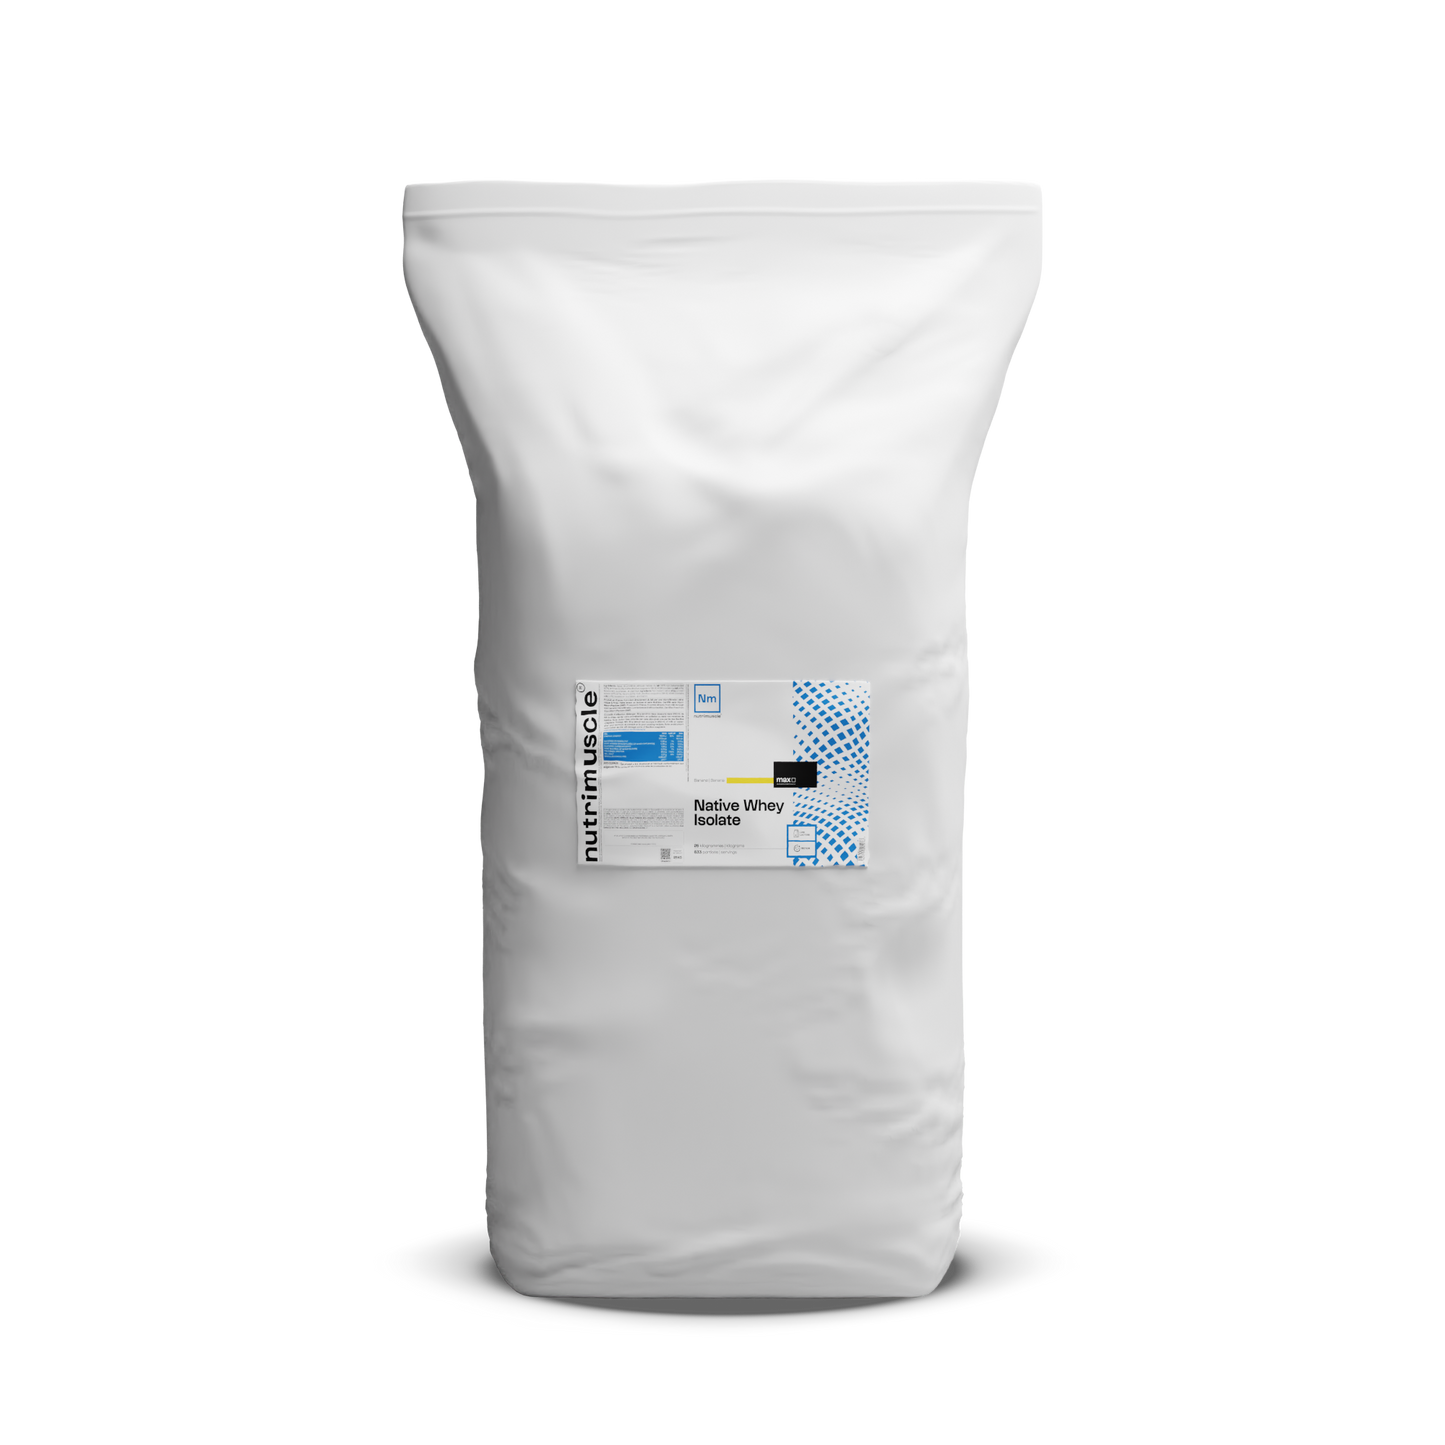 Whey Native Isolate (Low lactose)